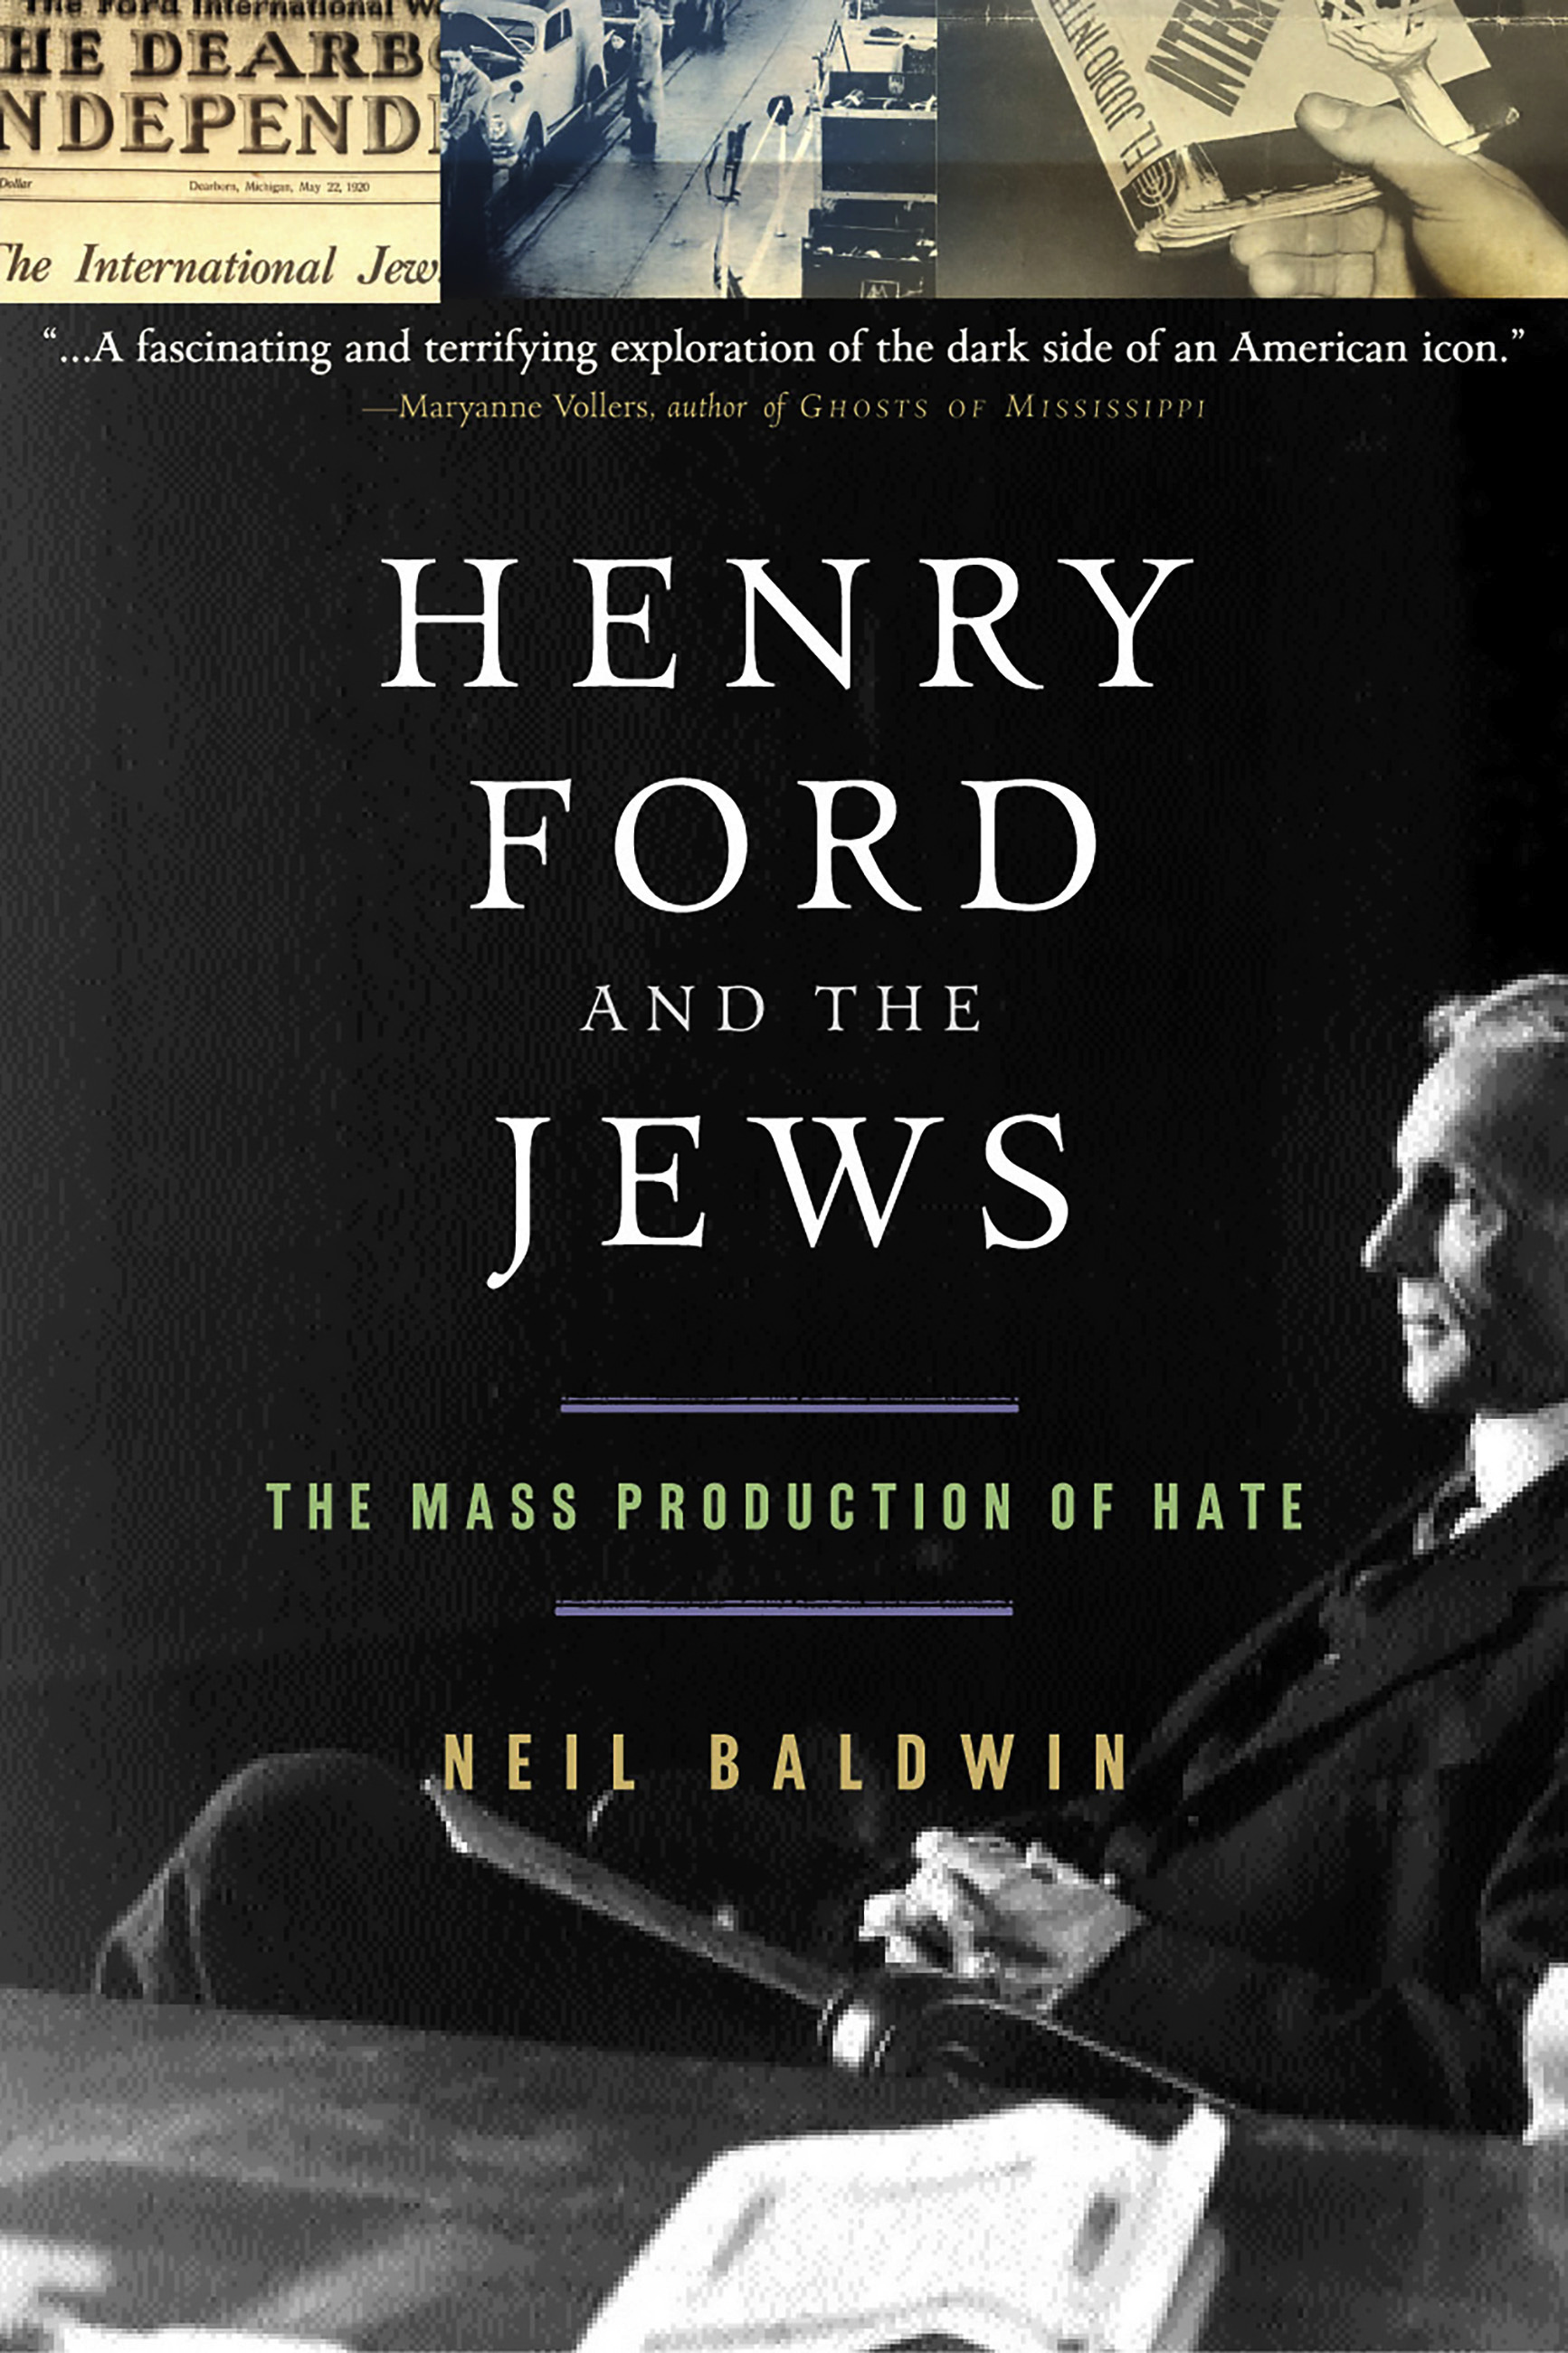 Henry Ford and the Jews by Neil Baldwin | PublicAffairs